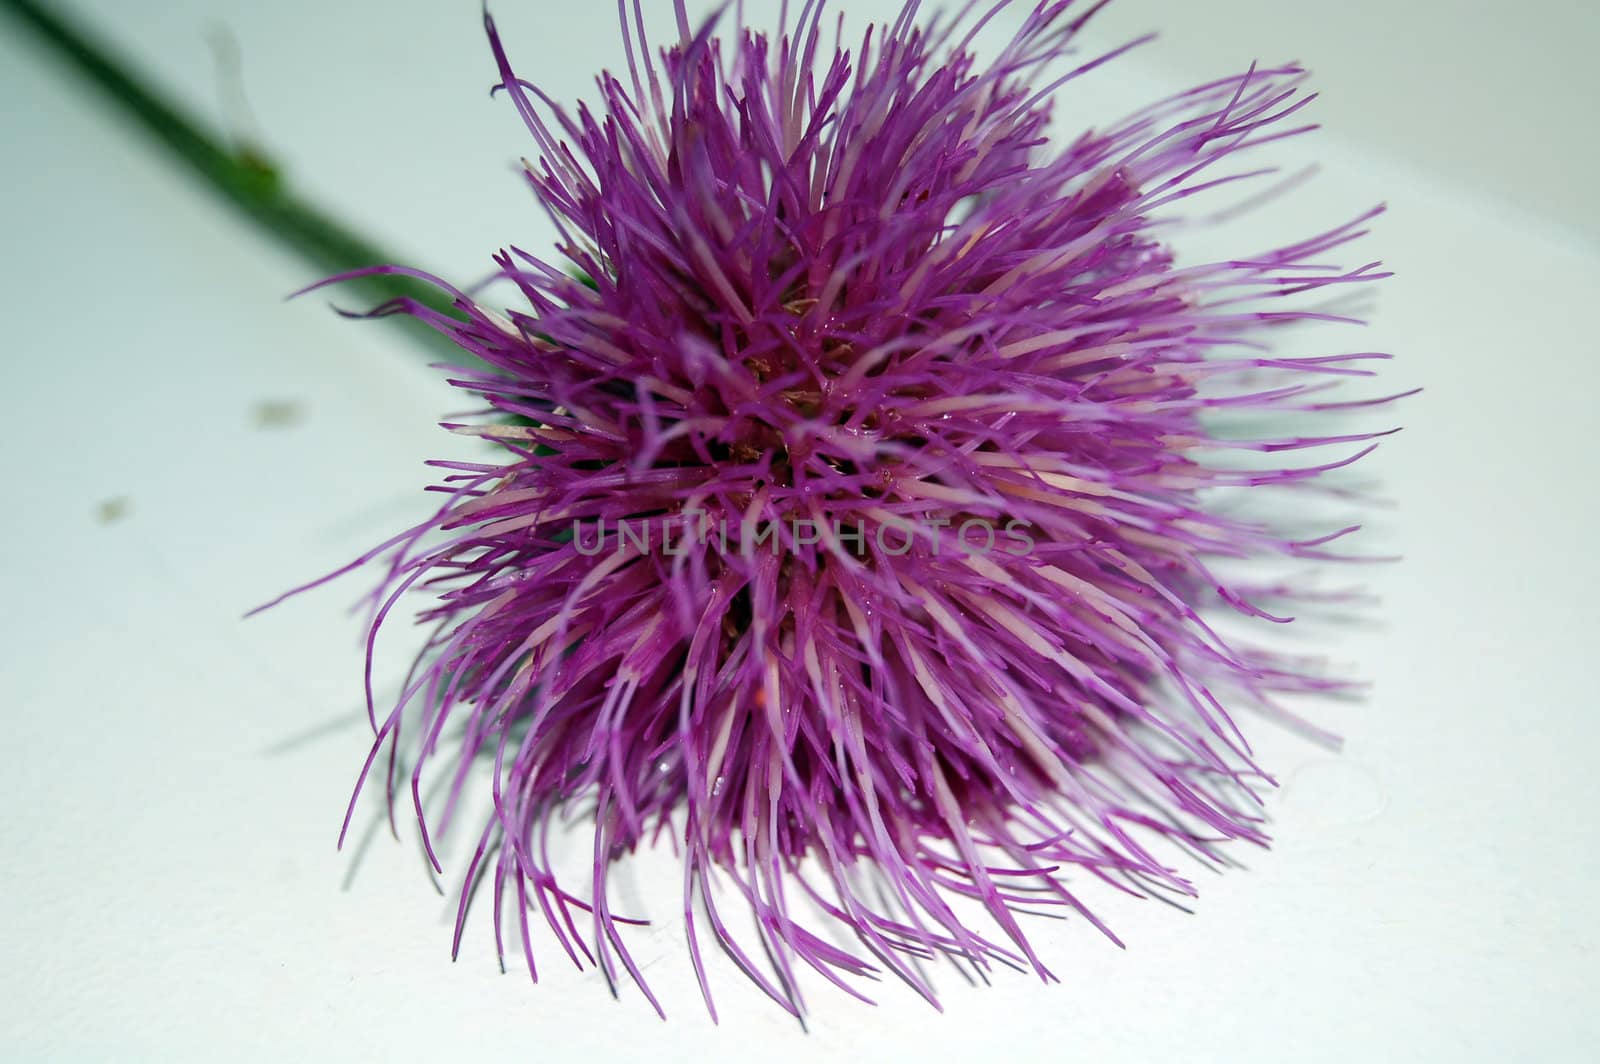  Roadside thistle by mojly